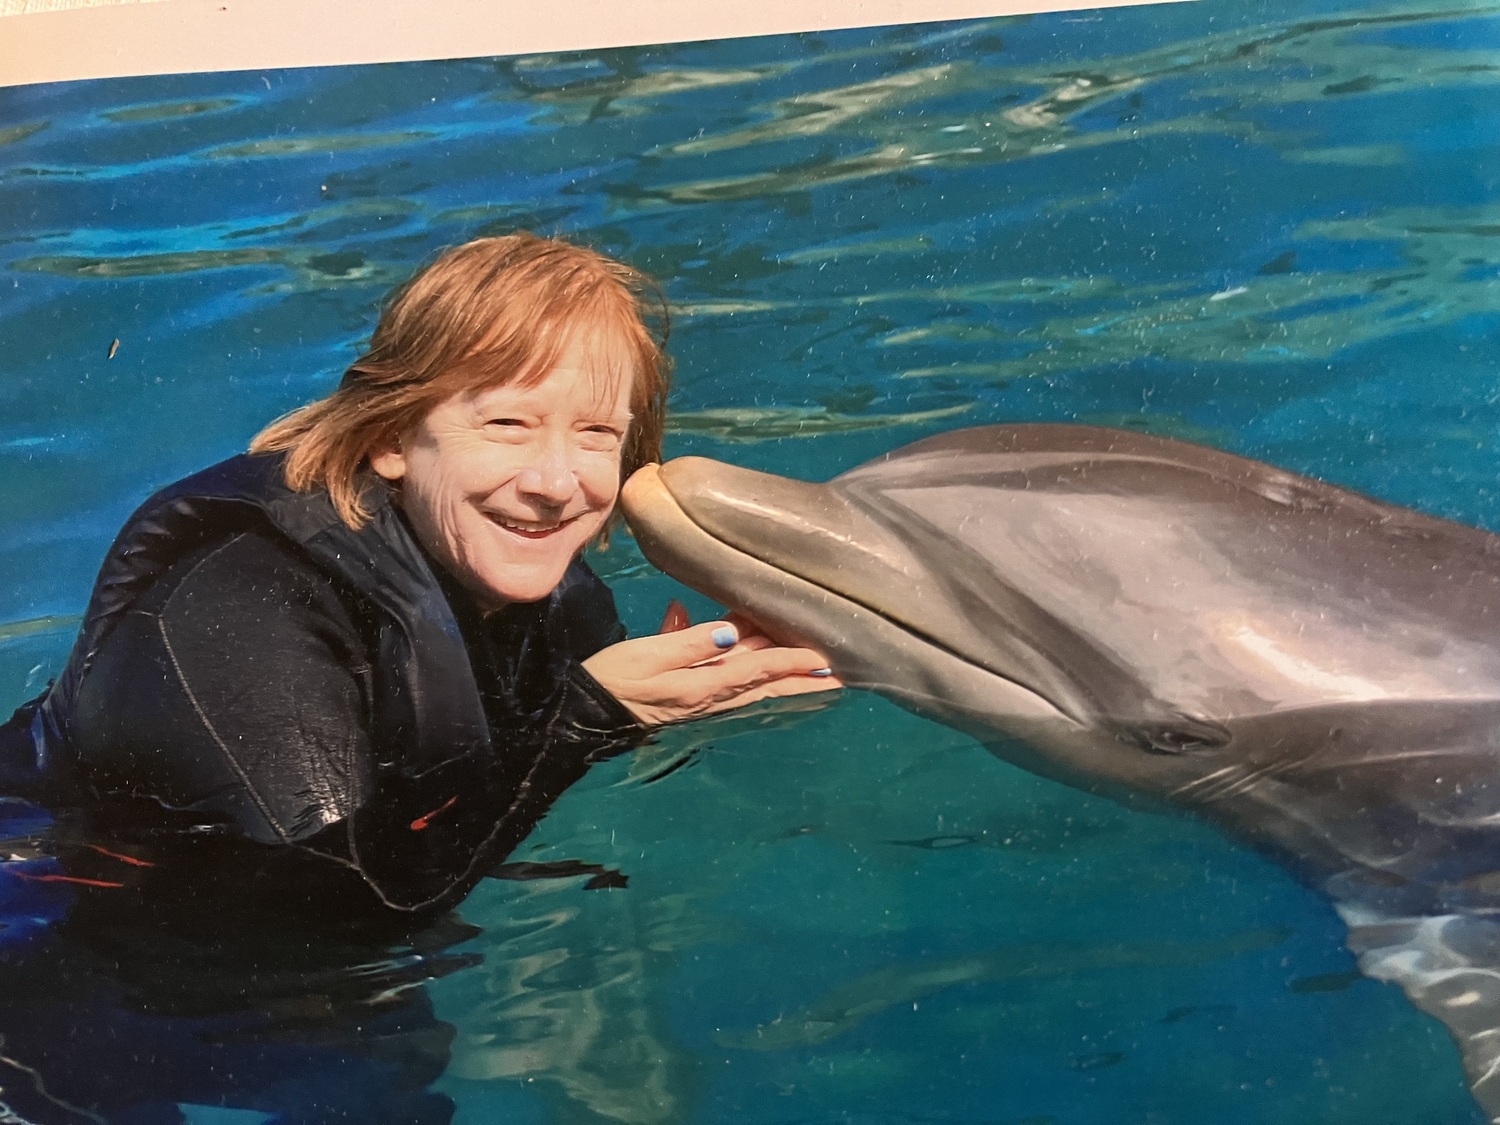 Nancy Bagshaw during a trip to Bermuda, where she was thrilled to swim with dolphins. Nancy was a beloved Spanish teacher in the Bridgehampton School for 17 years. She died last week at the age of 60.